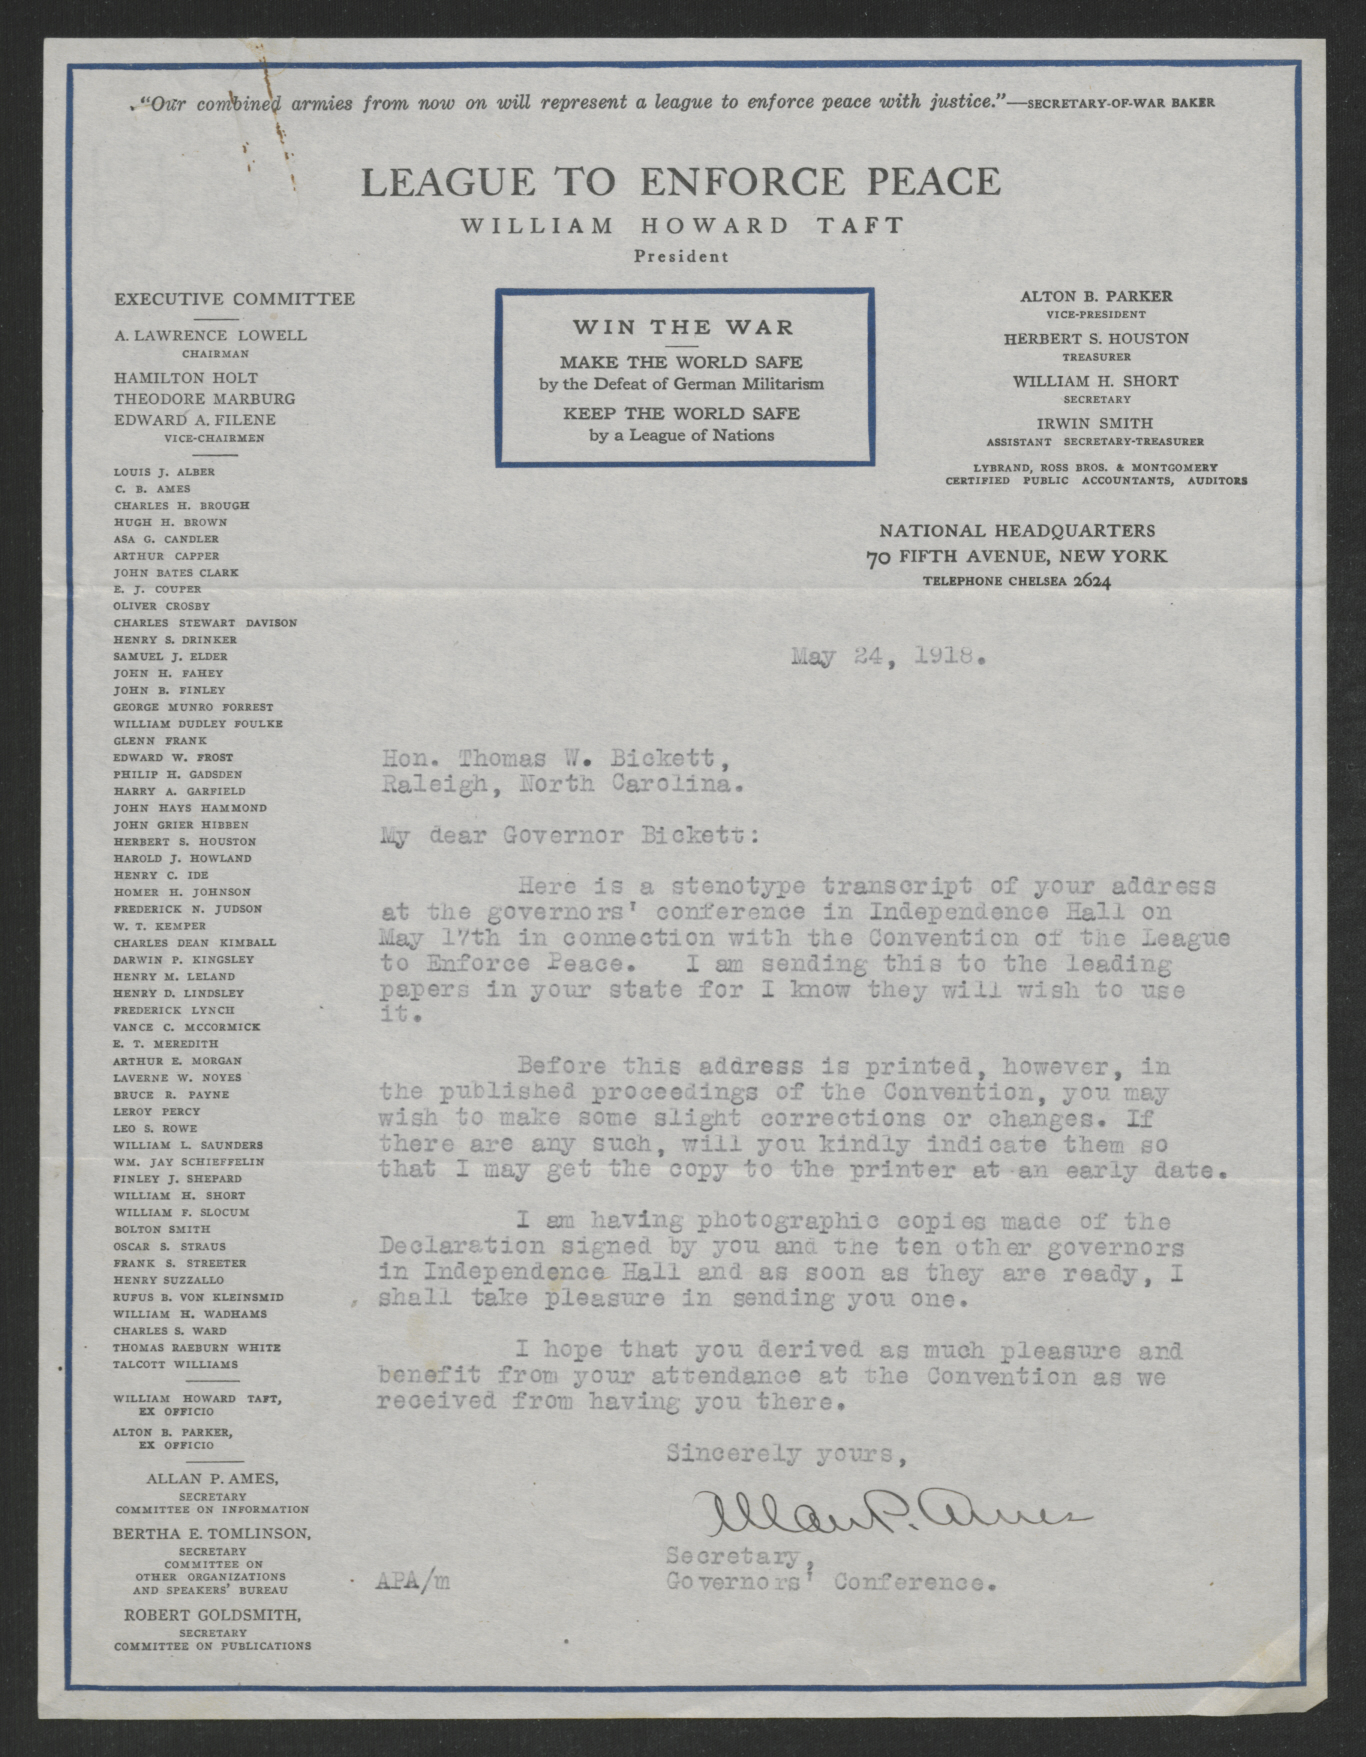 Letter from Allan P. Ames to Thomas W. Bickett, May 24, 1918